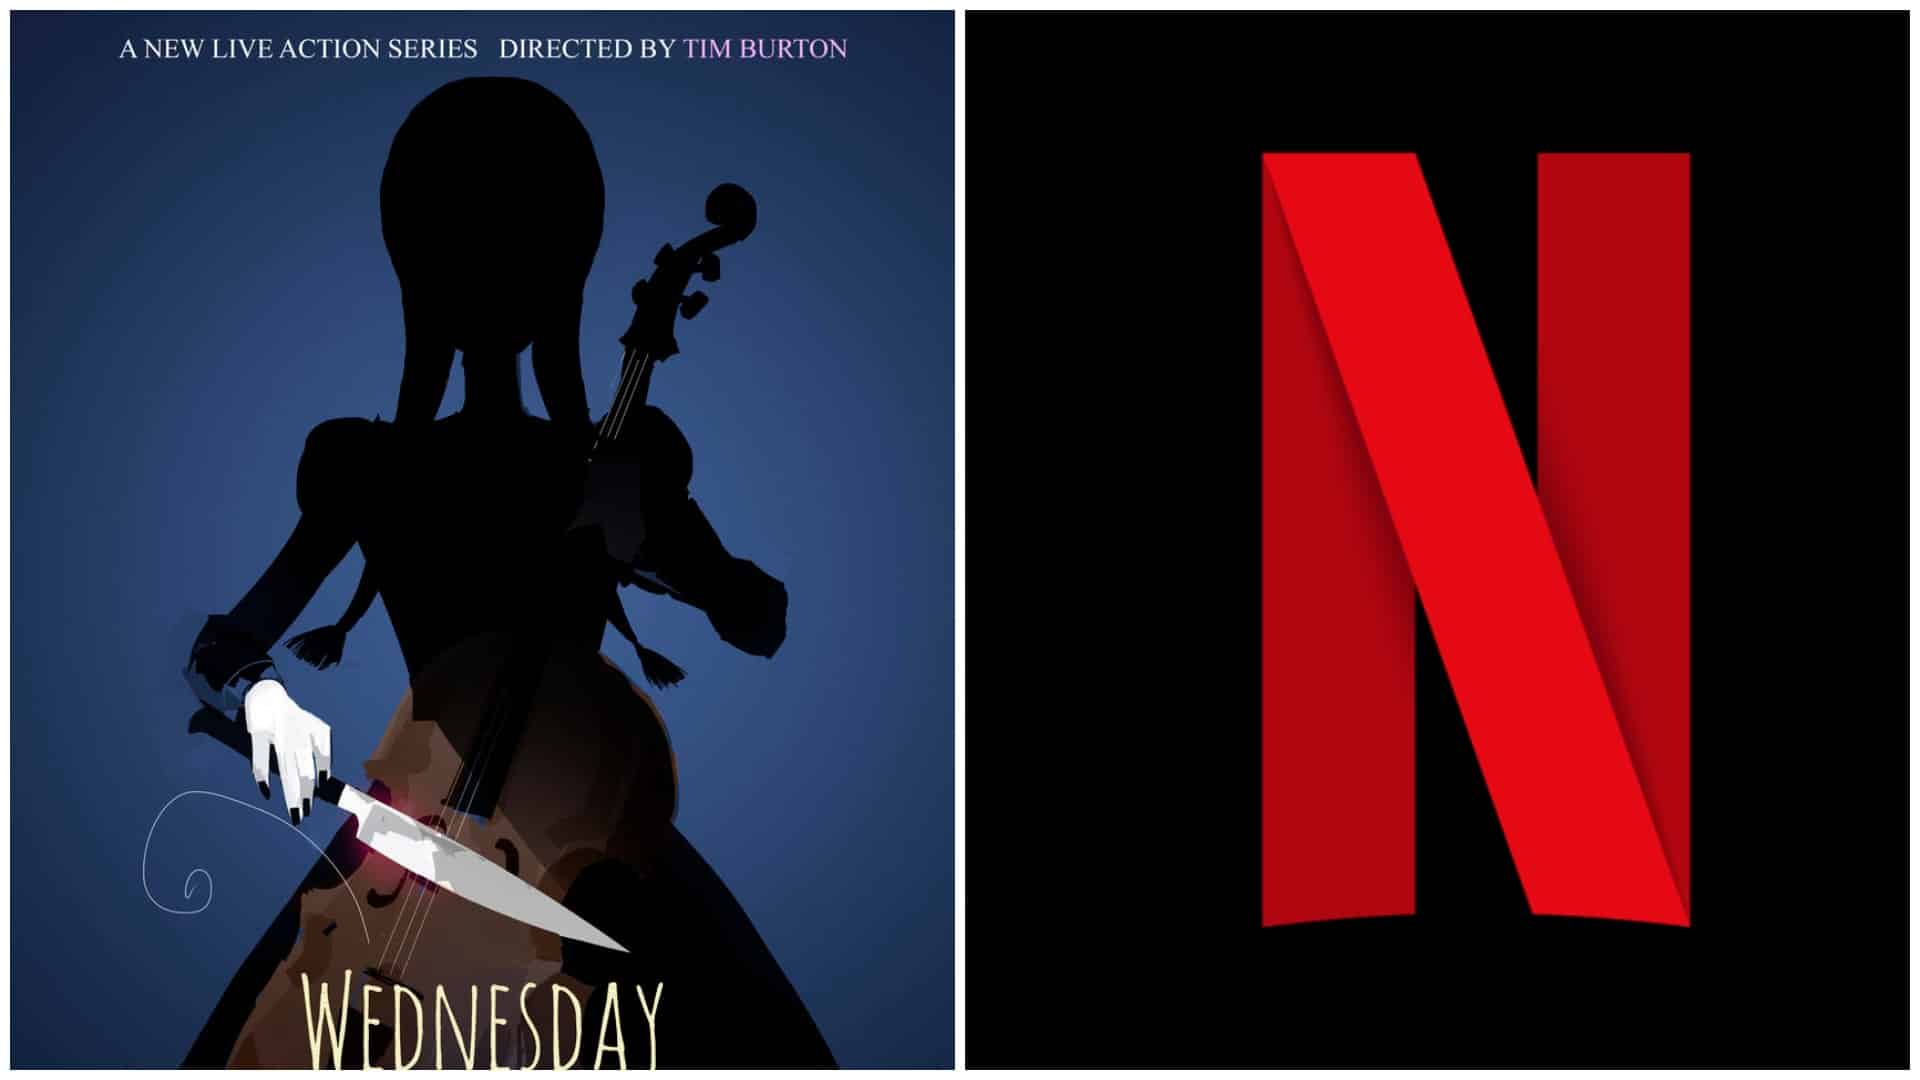 ‘Wednesday’ Series Of Tim Burton's To Get Launched On Netflix So Soon